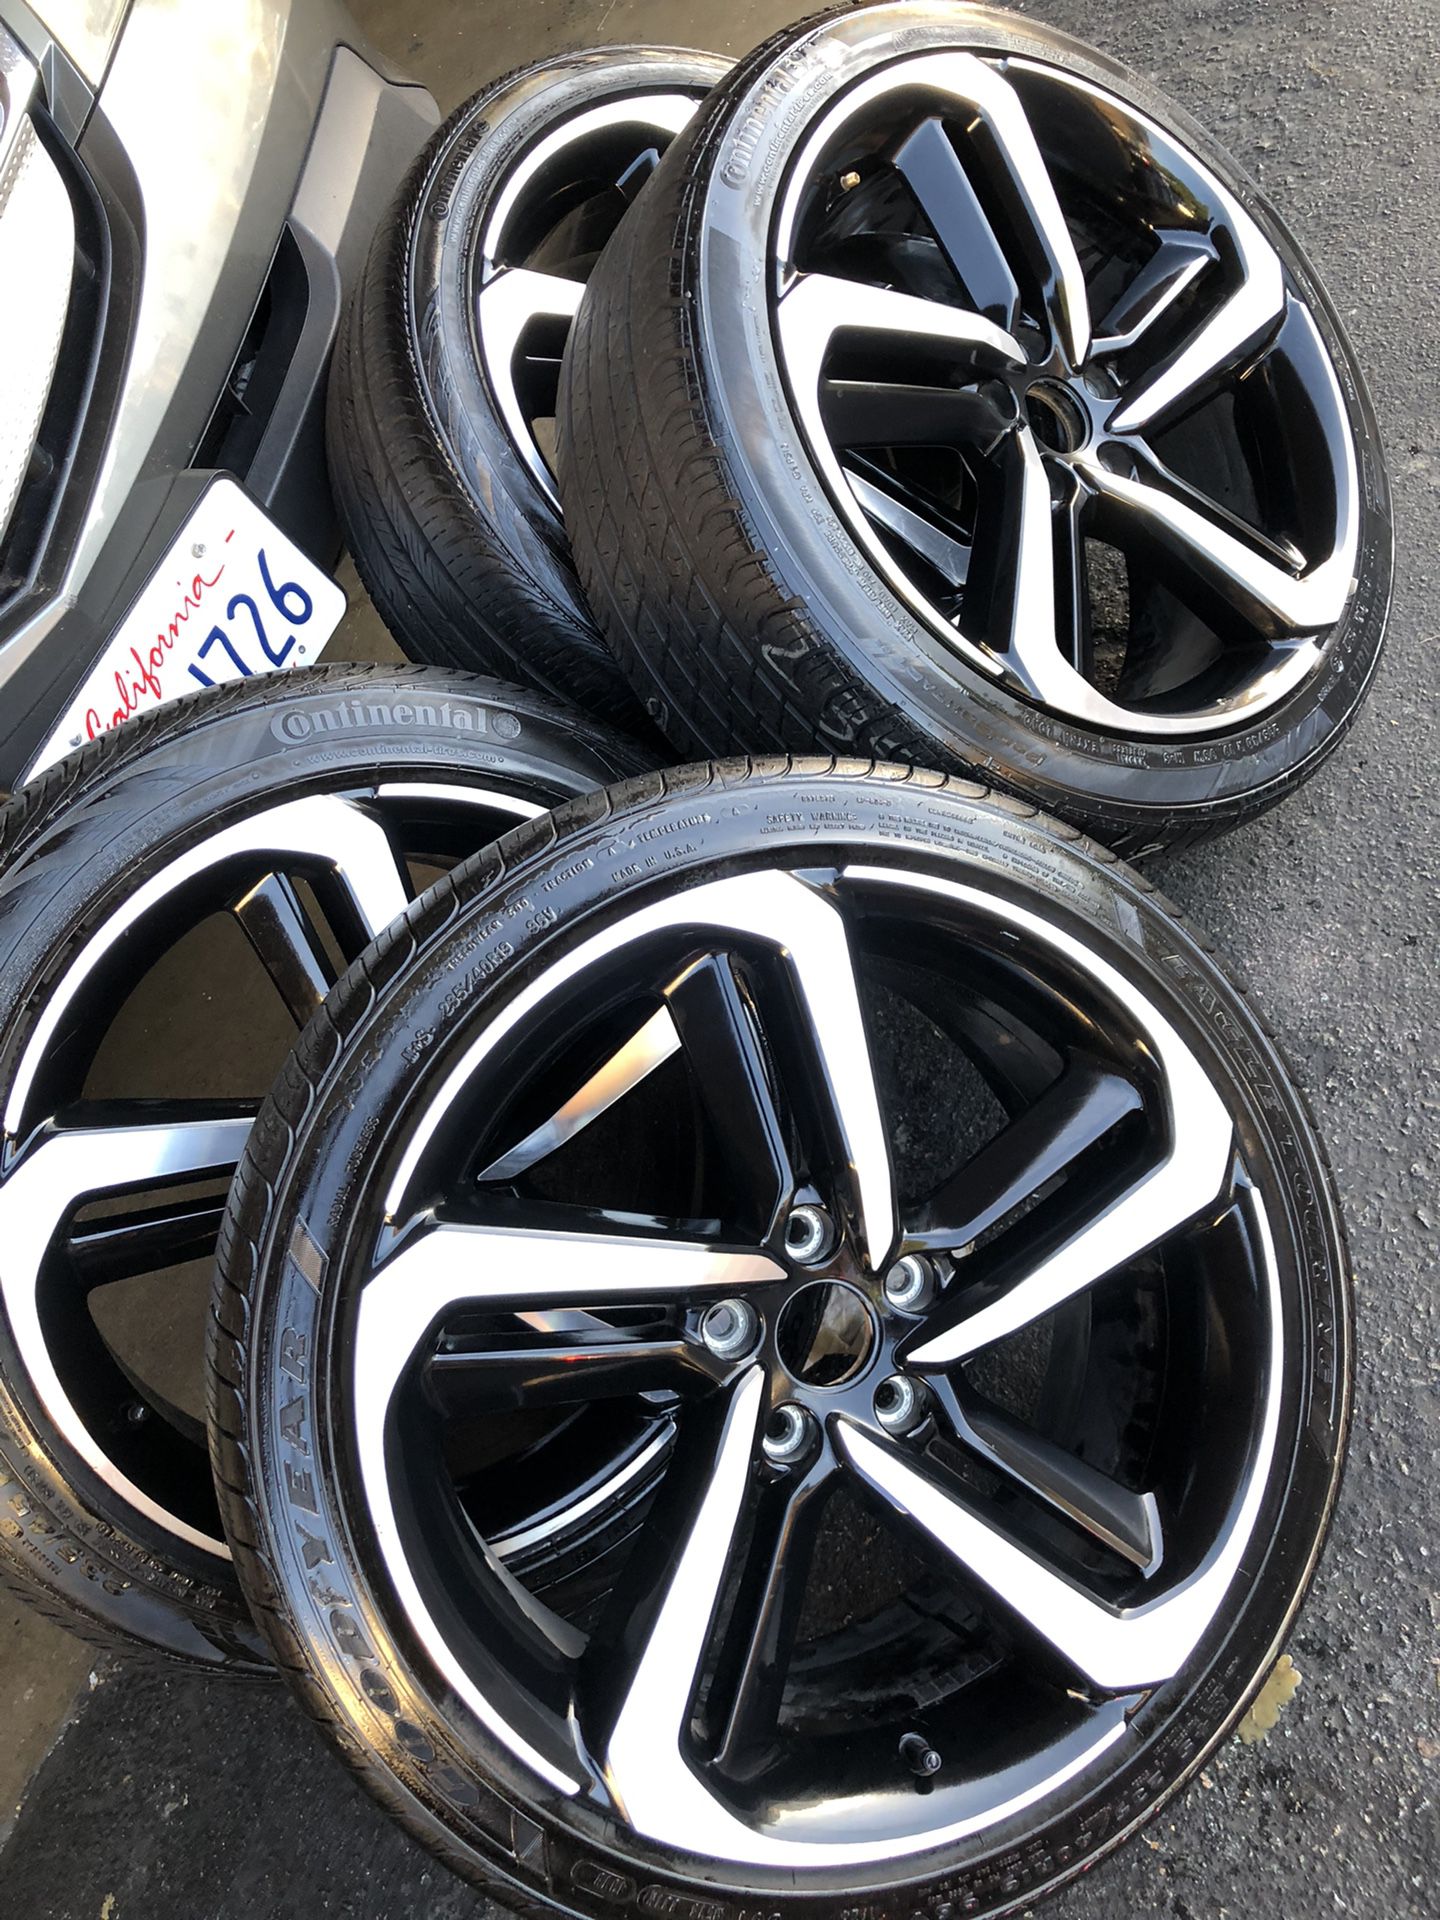 Rims and tires 19x8 5x114 for Honda acord sport civic crv as is rashes scratches but good tires